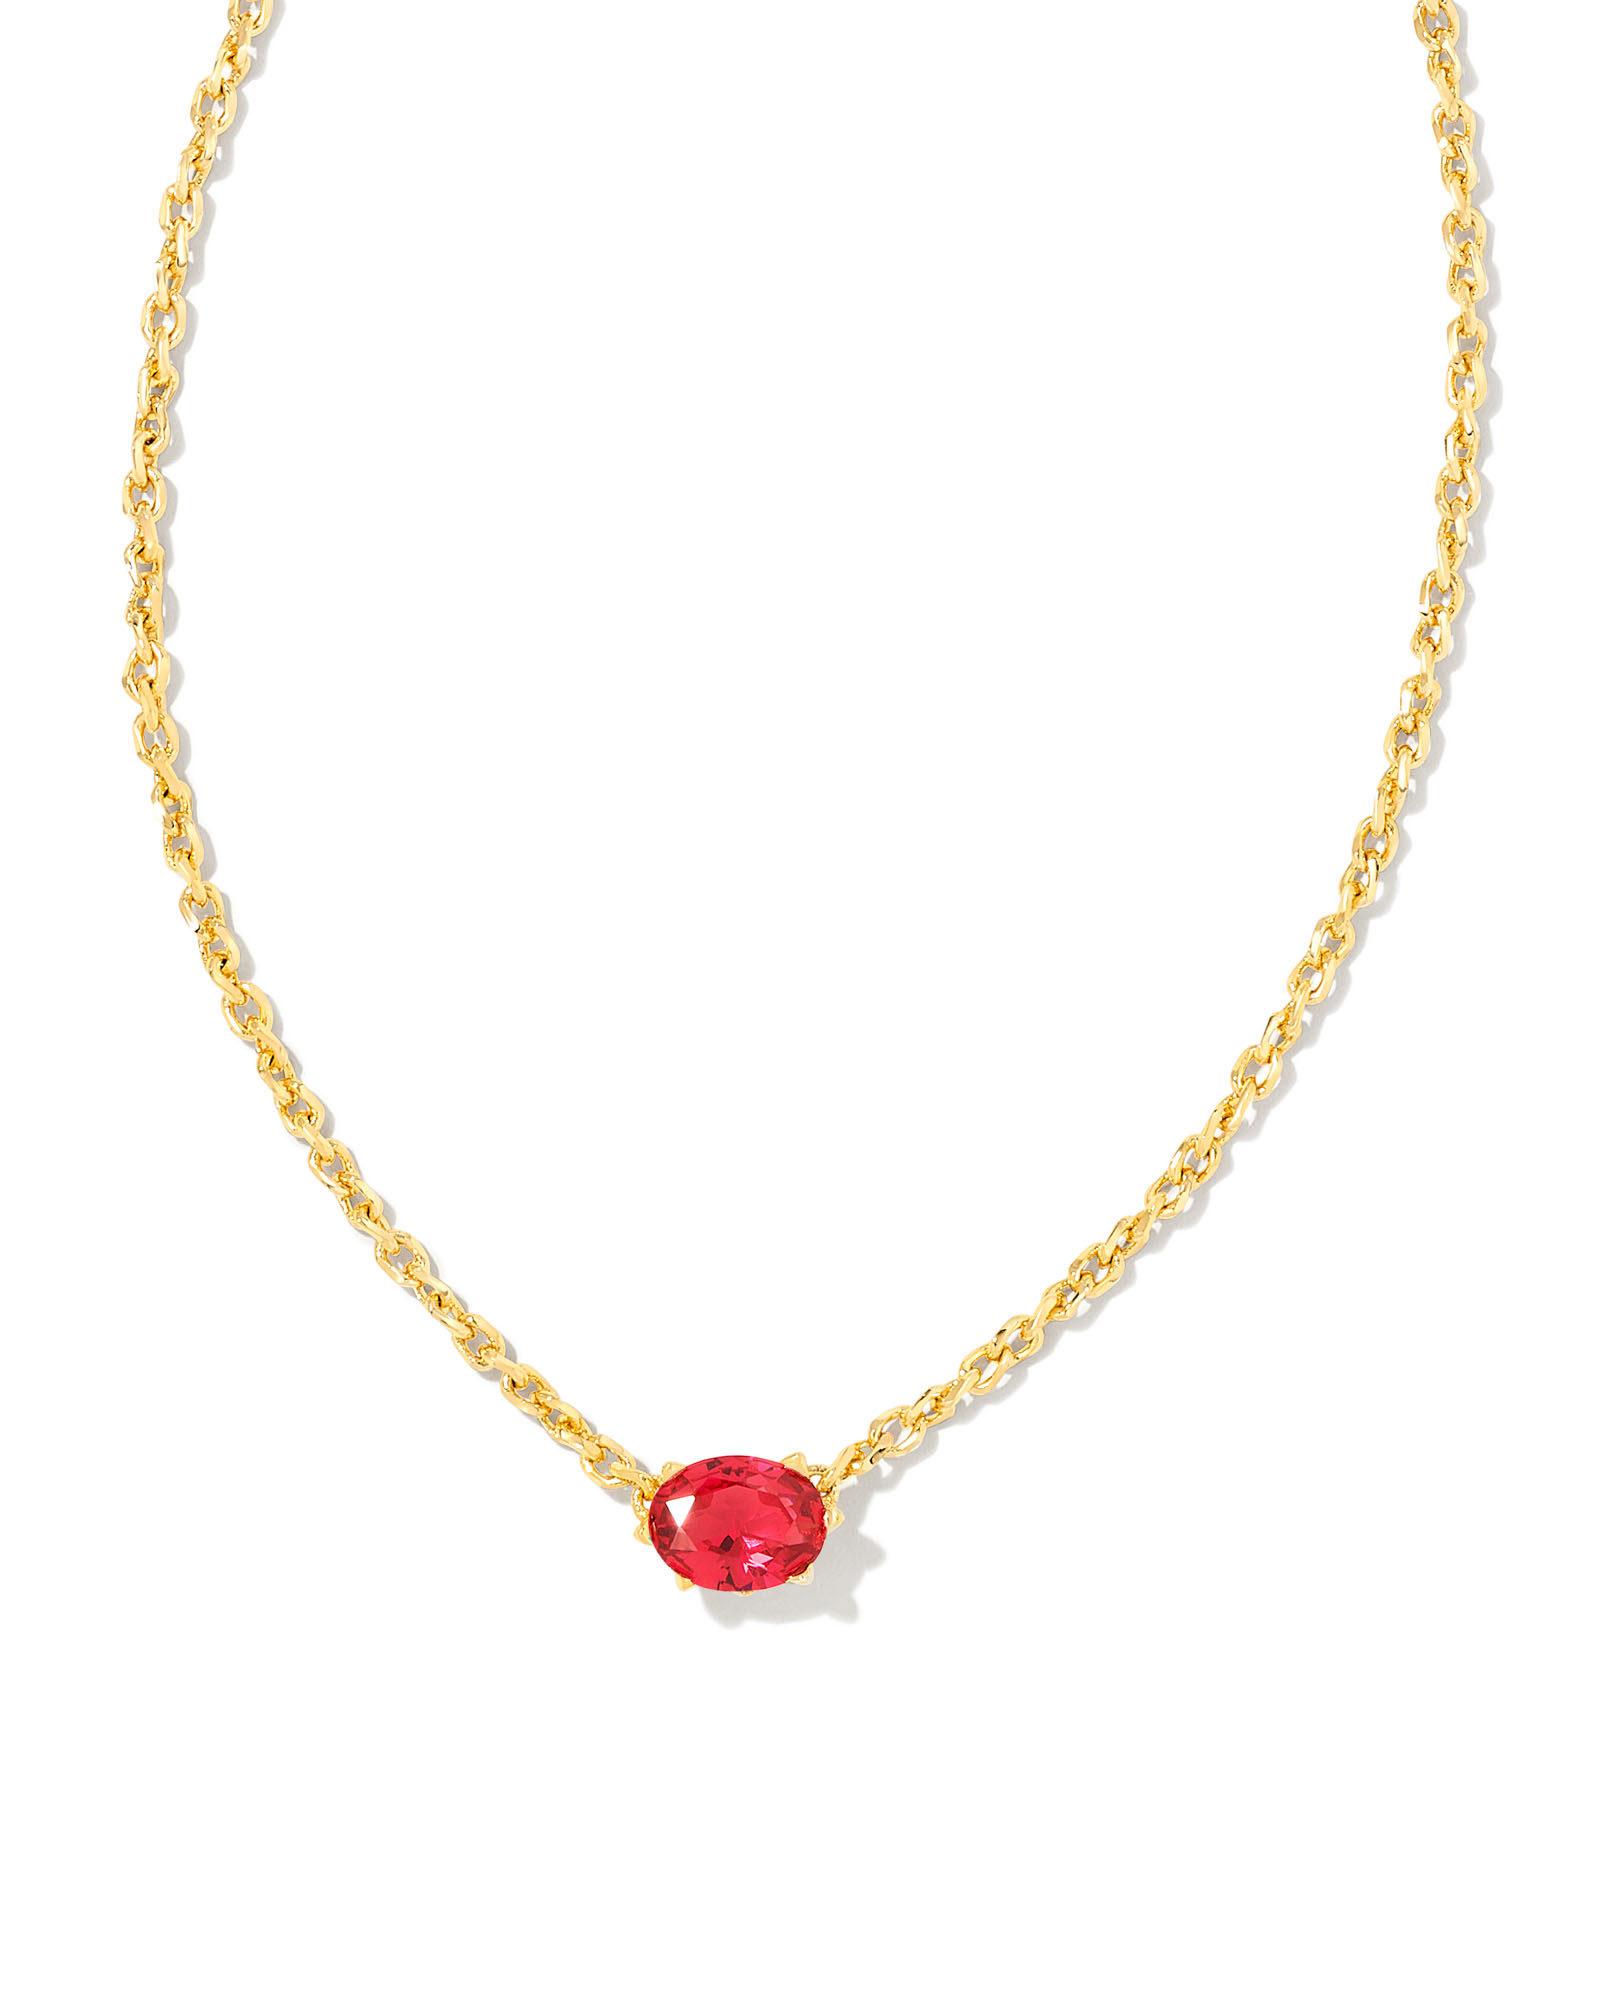 Red Crystal Beads Golden Pendant Necklace - Fashionvalley